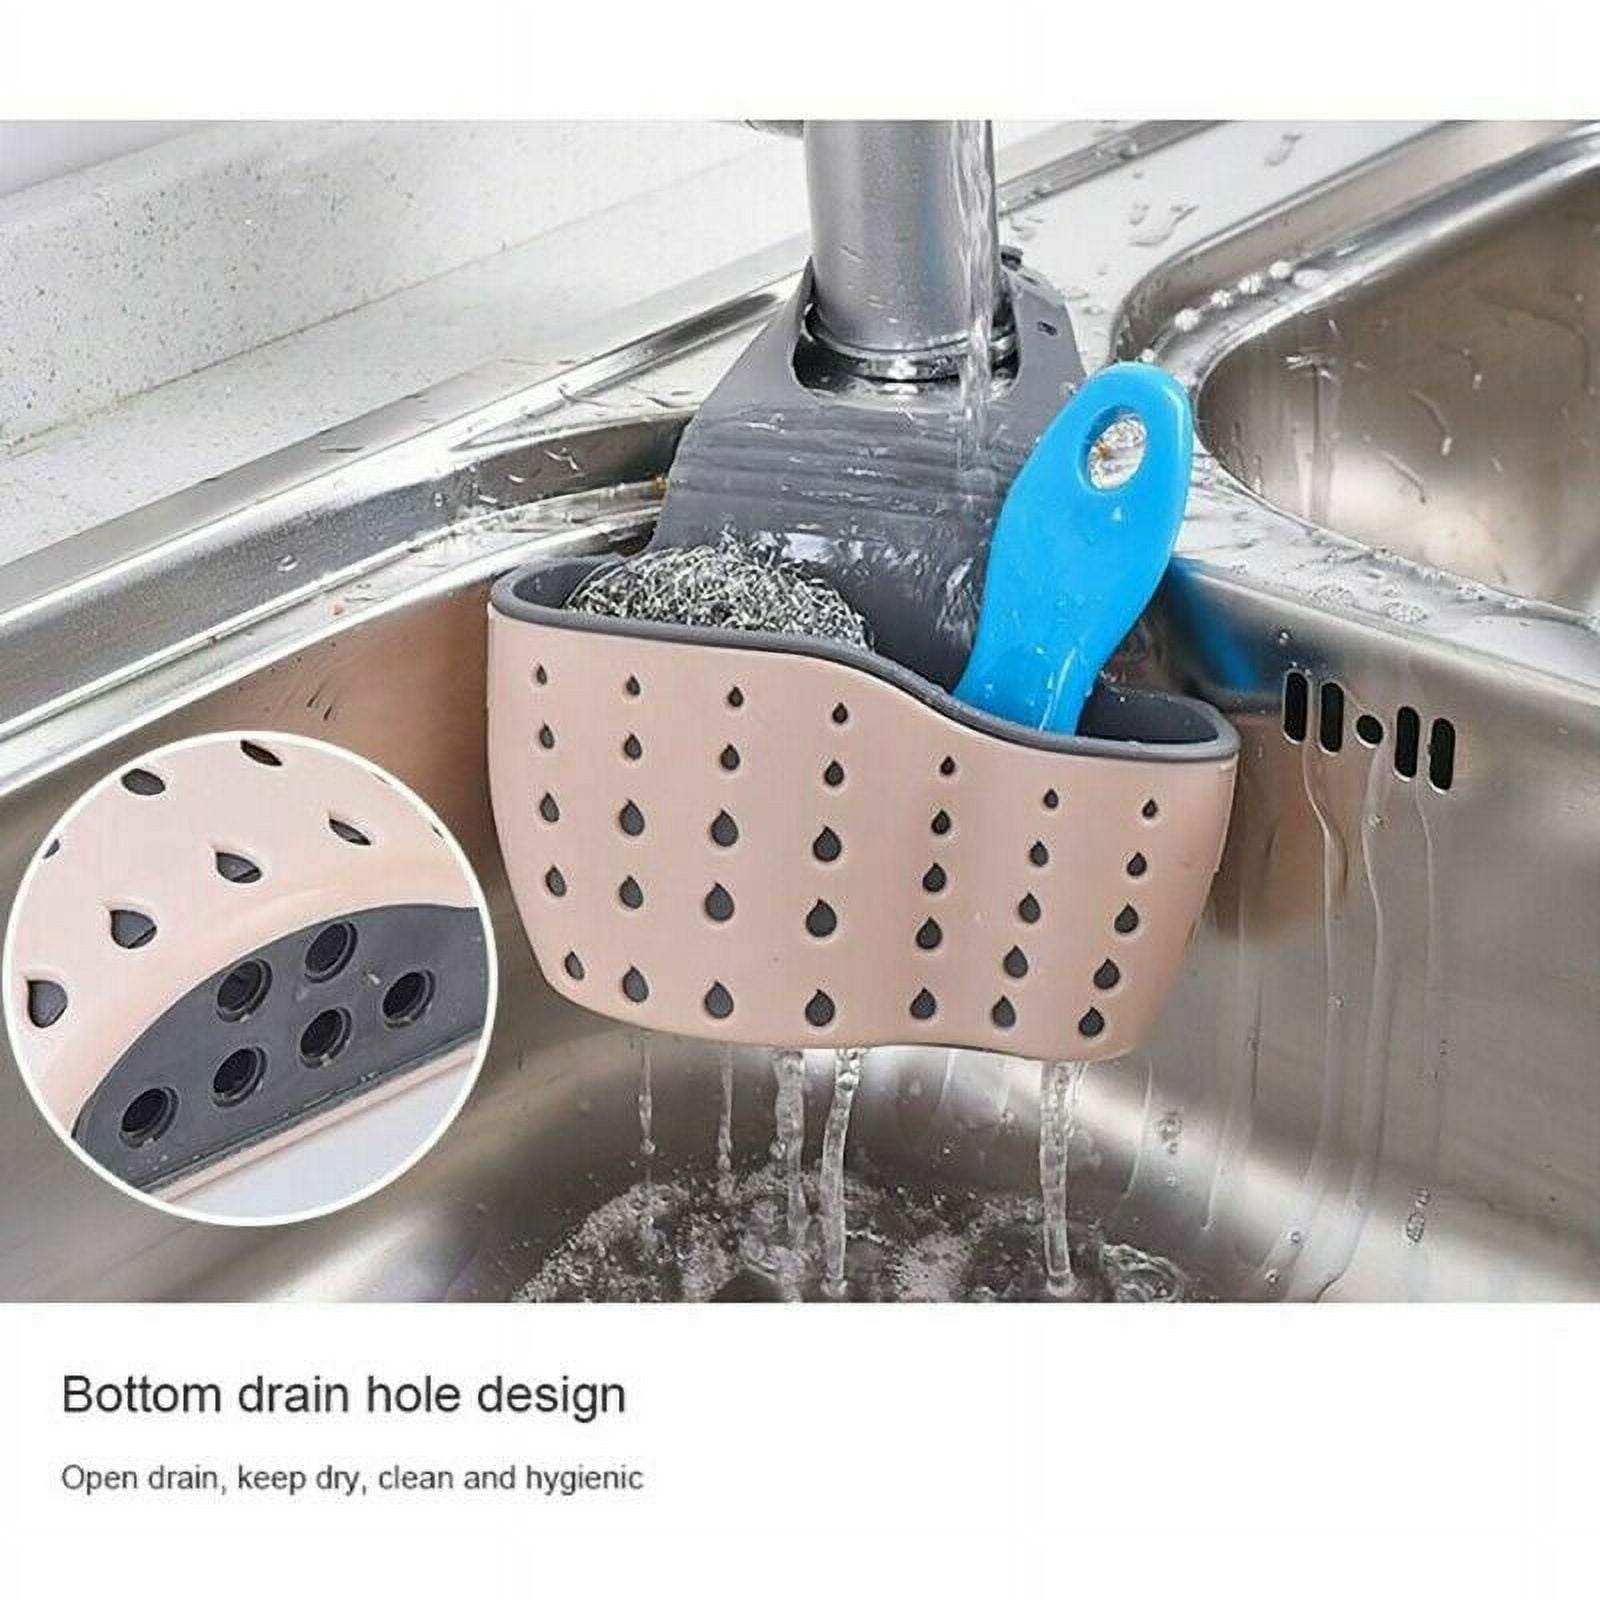 EFFILOGIC Kitchen Soap Tray - Dish Soap Holder for Kitchen Counter Kitchen  Sink Sponge Holder Sink Protectors for Kitchen Sink Organizer Drying Mat